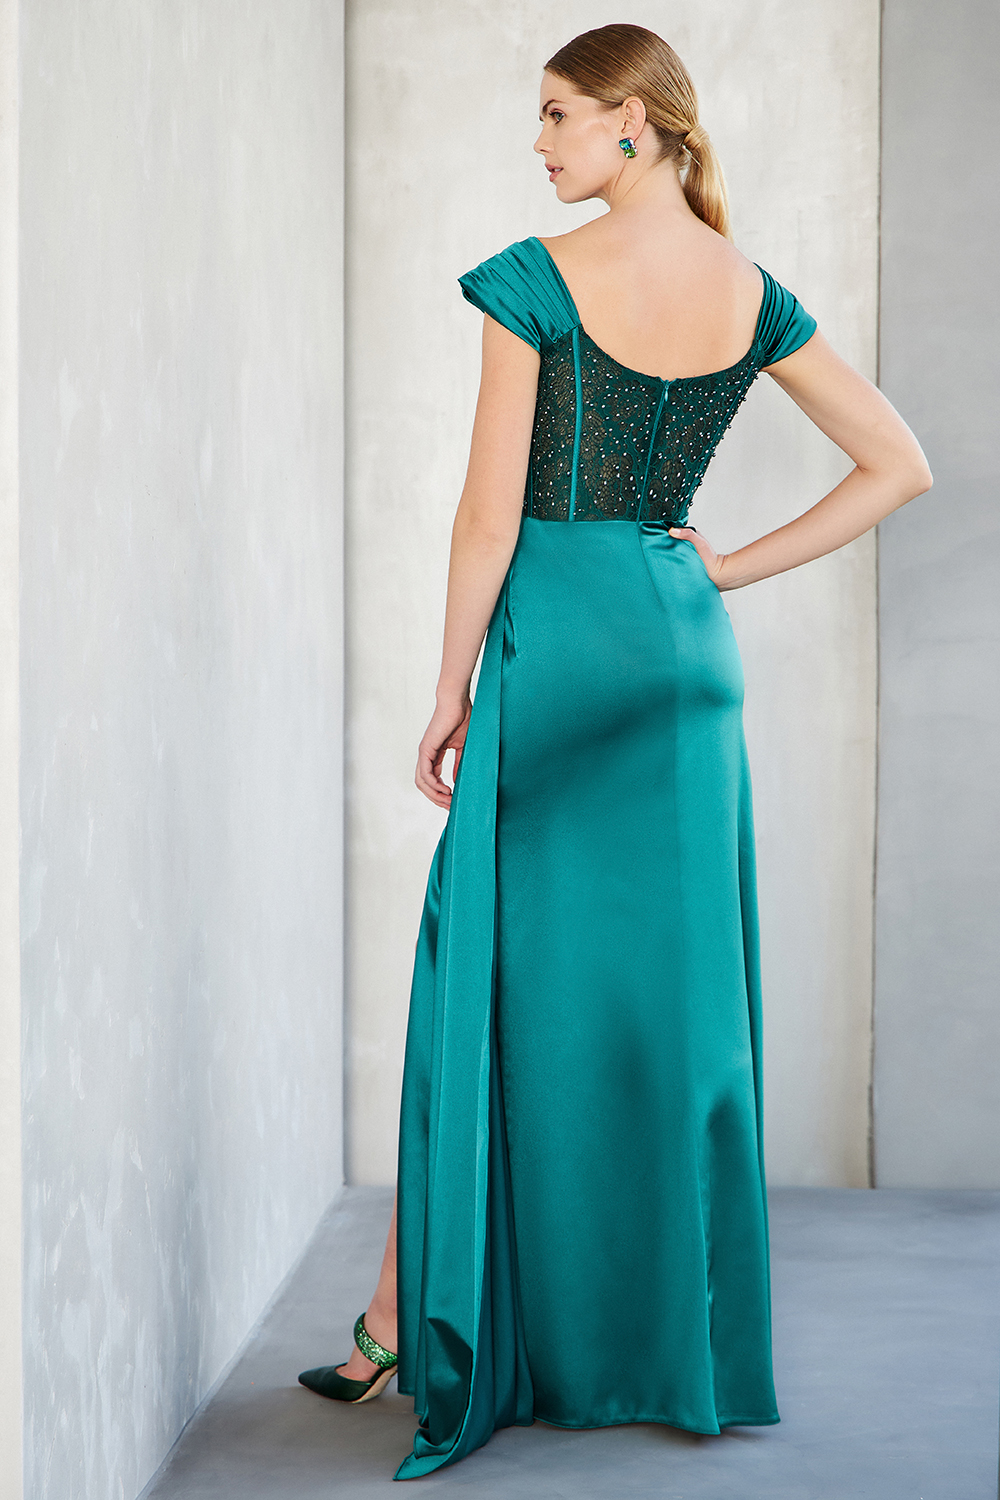 Evening Dresses / Long evening satin dress with lace at the top